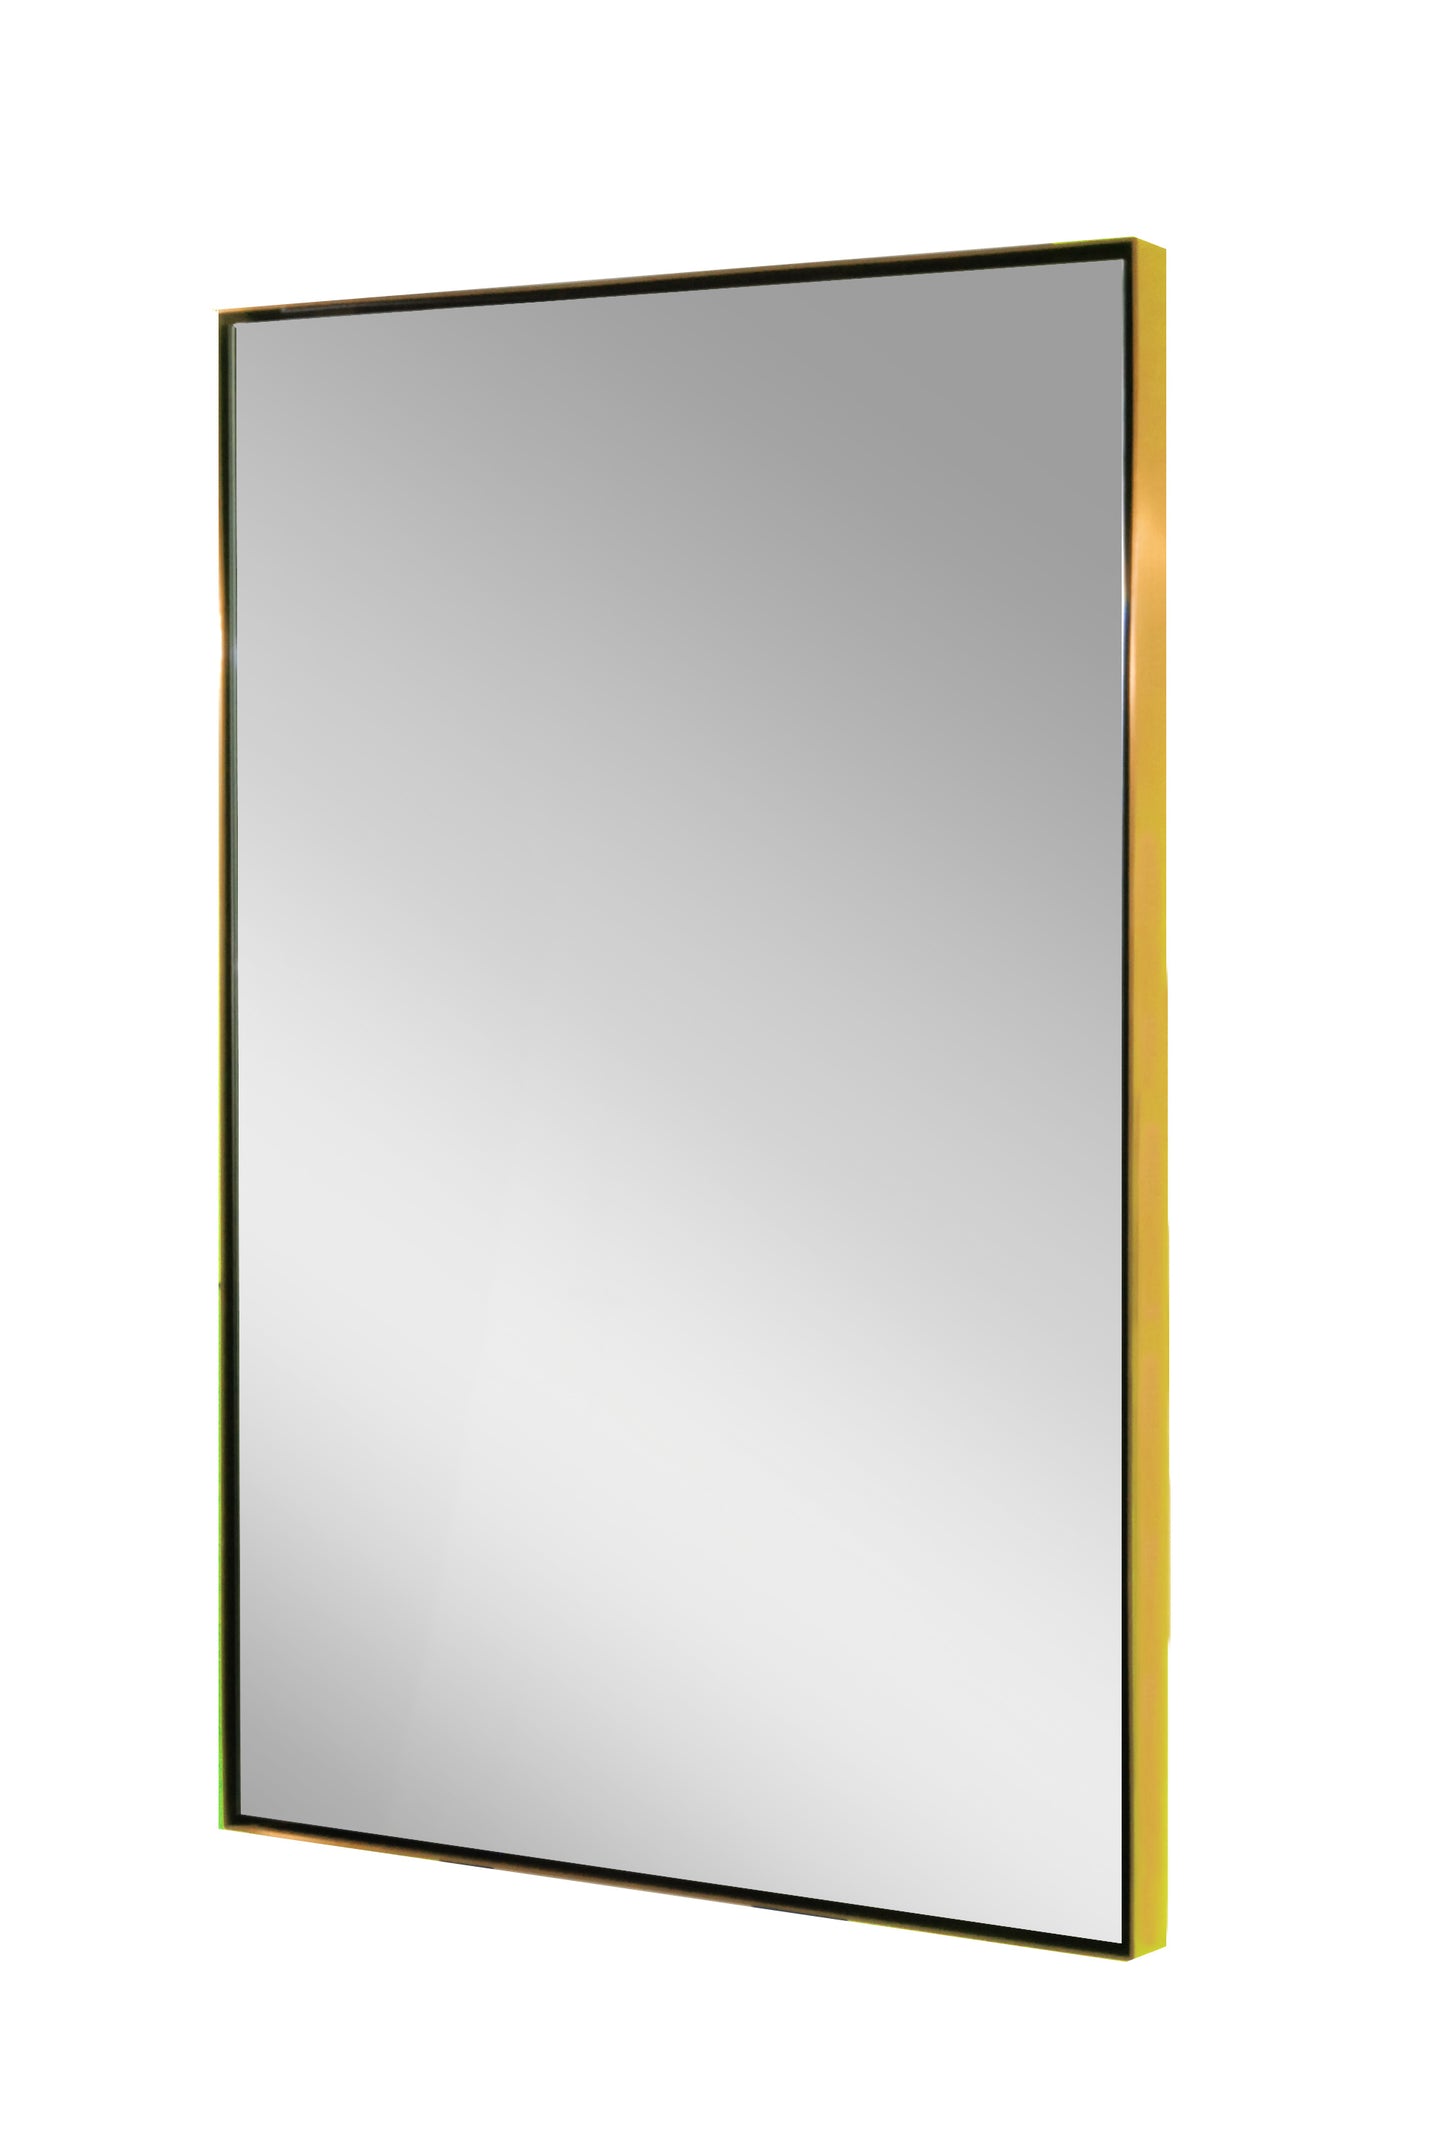 Plated brushed brass finish square mirror